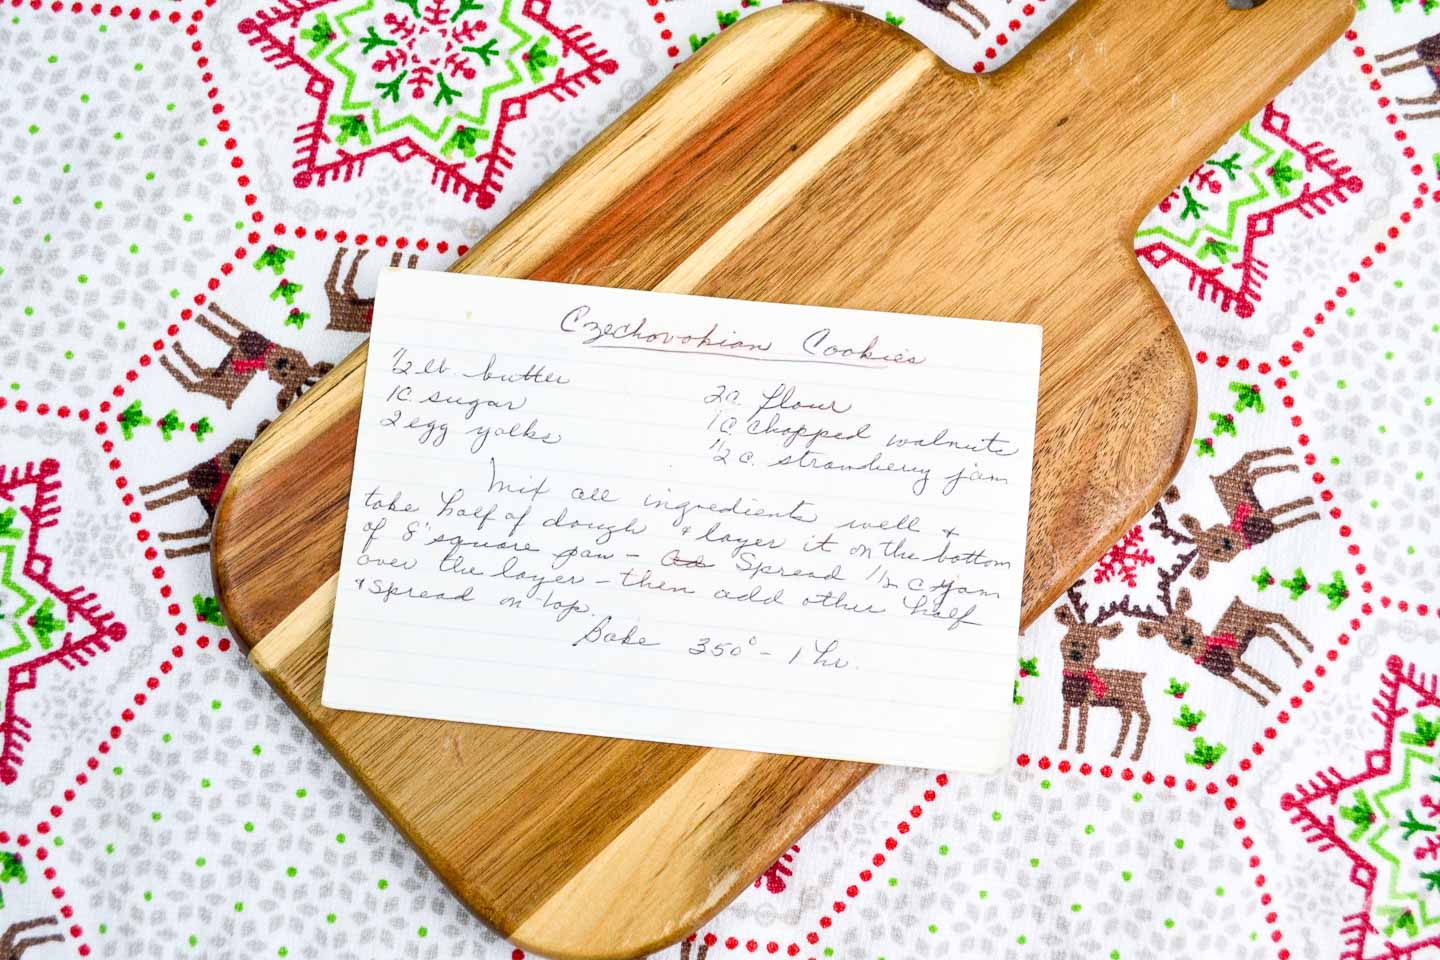 cookie recipe in my grandmother - granny's - handrwriting